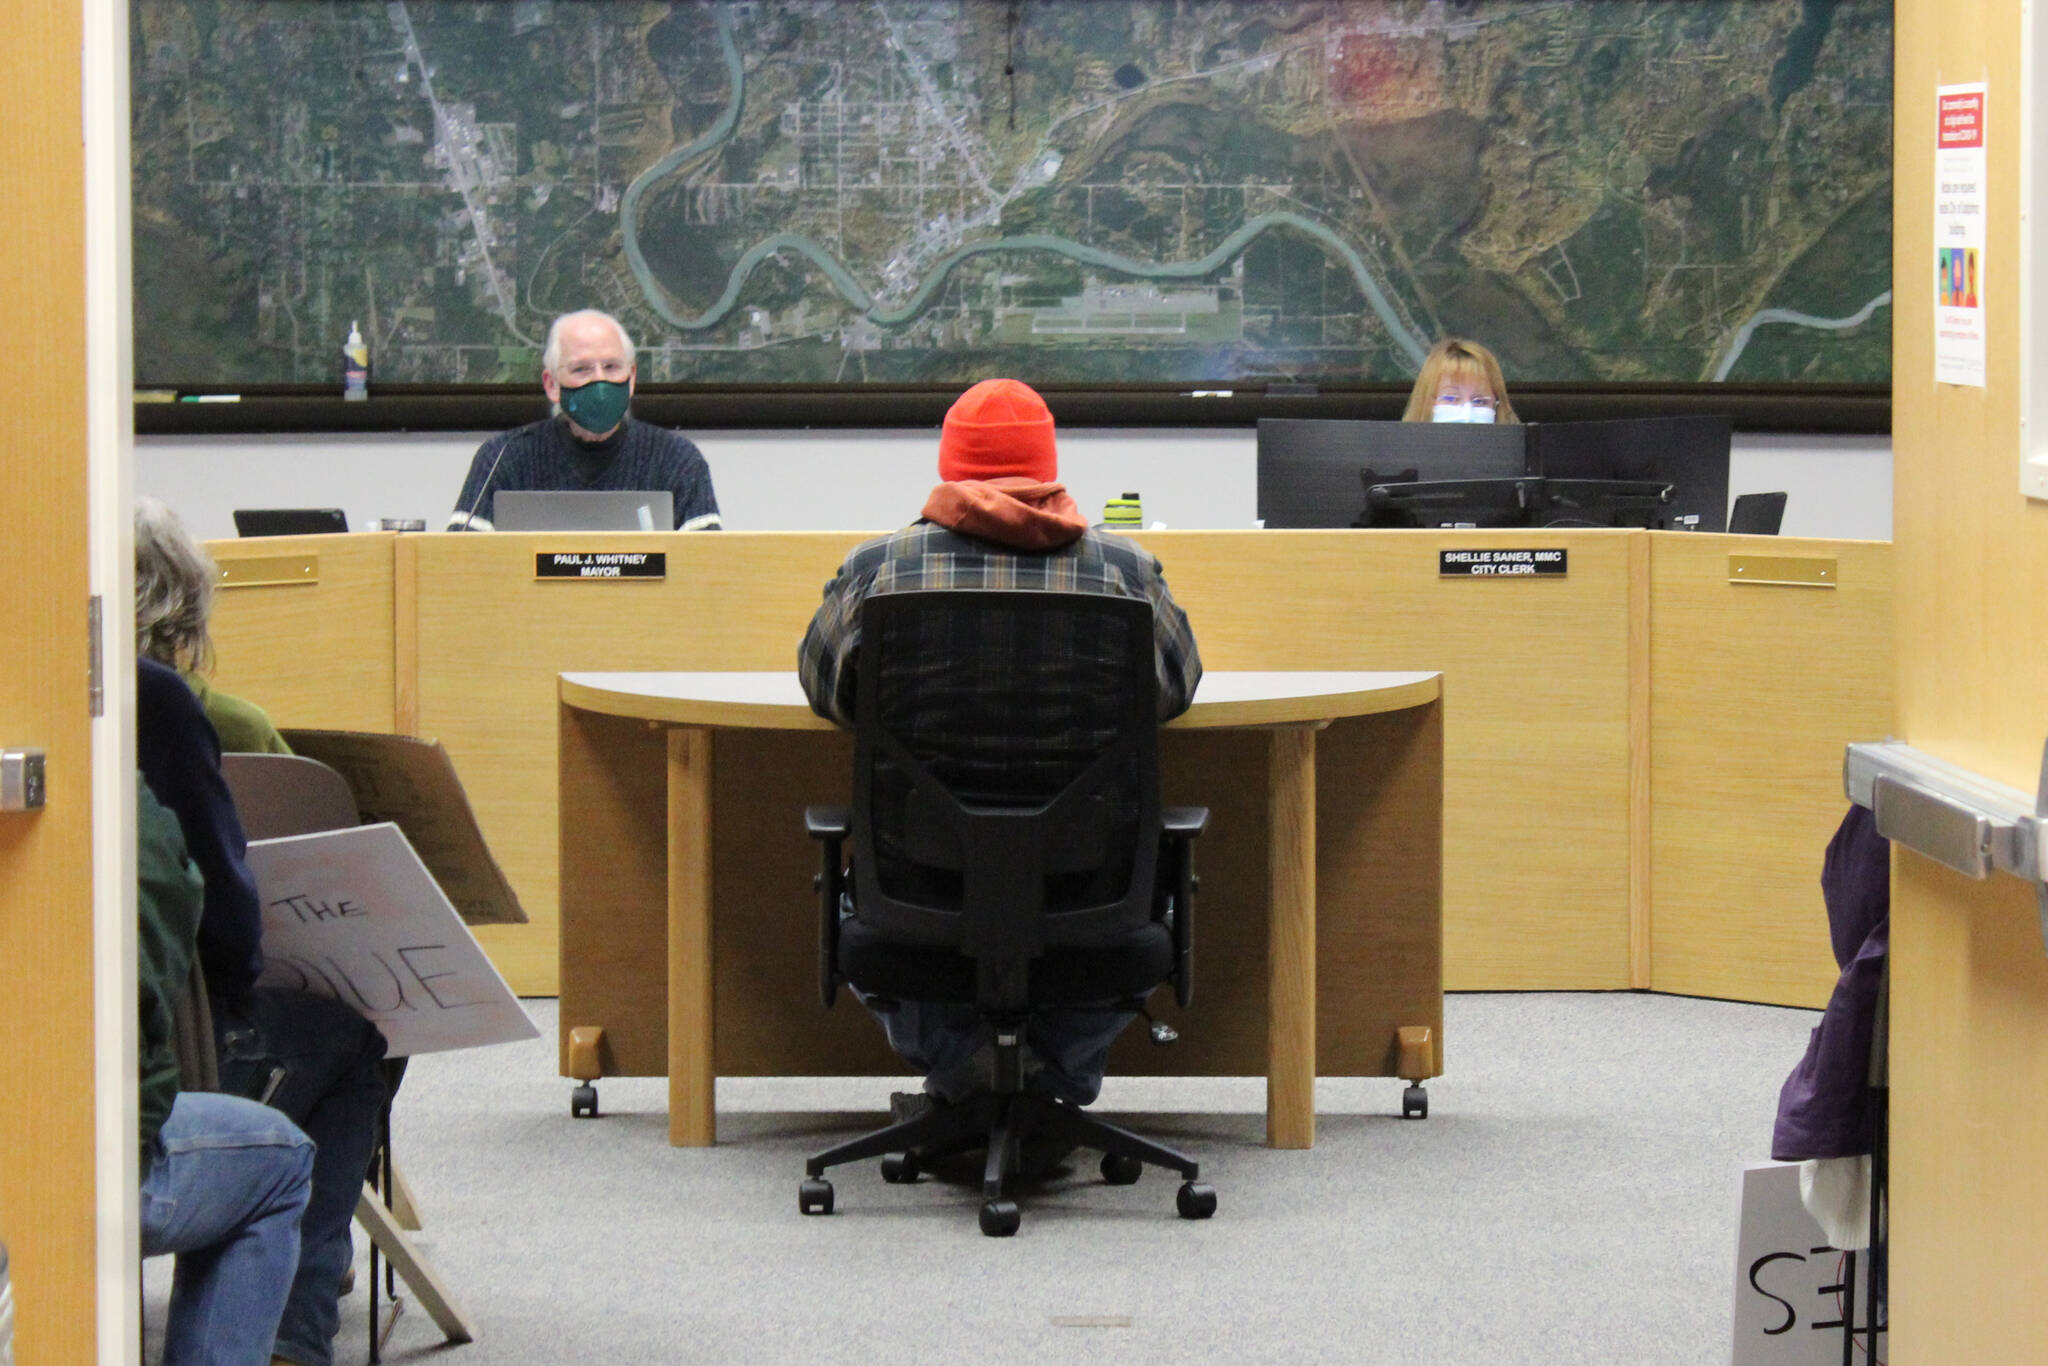 Jason Floyd testifies in opposition to COVID-19 mandates during a meeting of the Soldotna City Council on Wednesday, Oct. 13, 2021 in Soldotna, Alaska. (Ashlyn O’Hara/Peninsula Clarion)